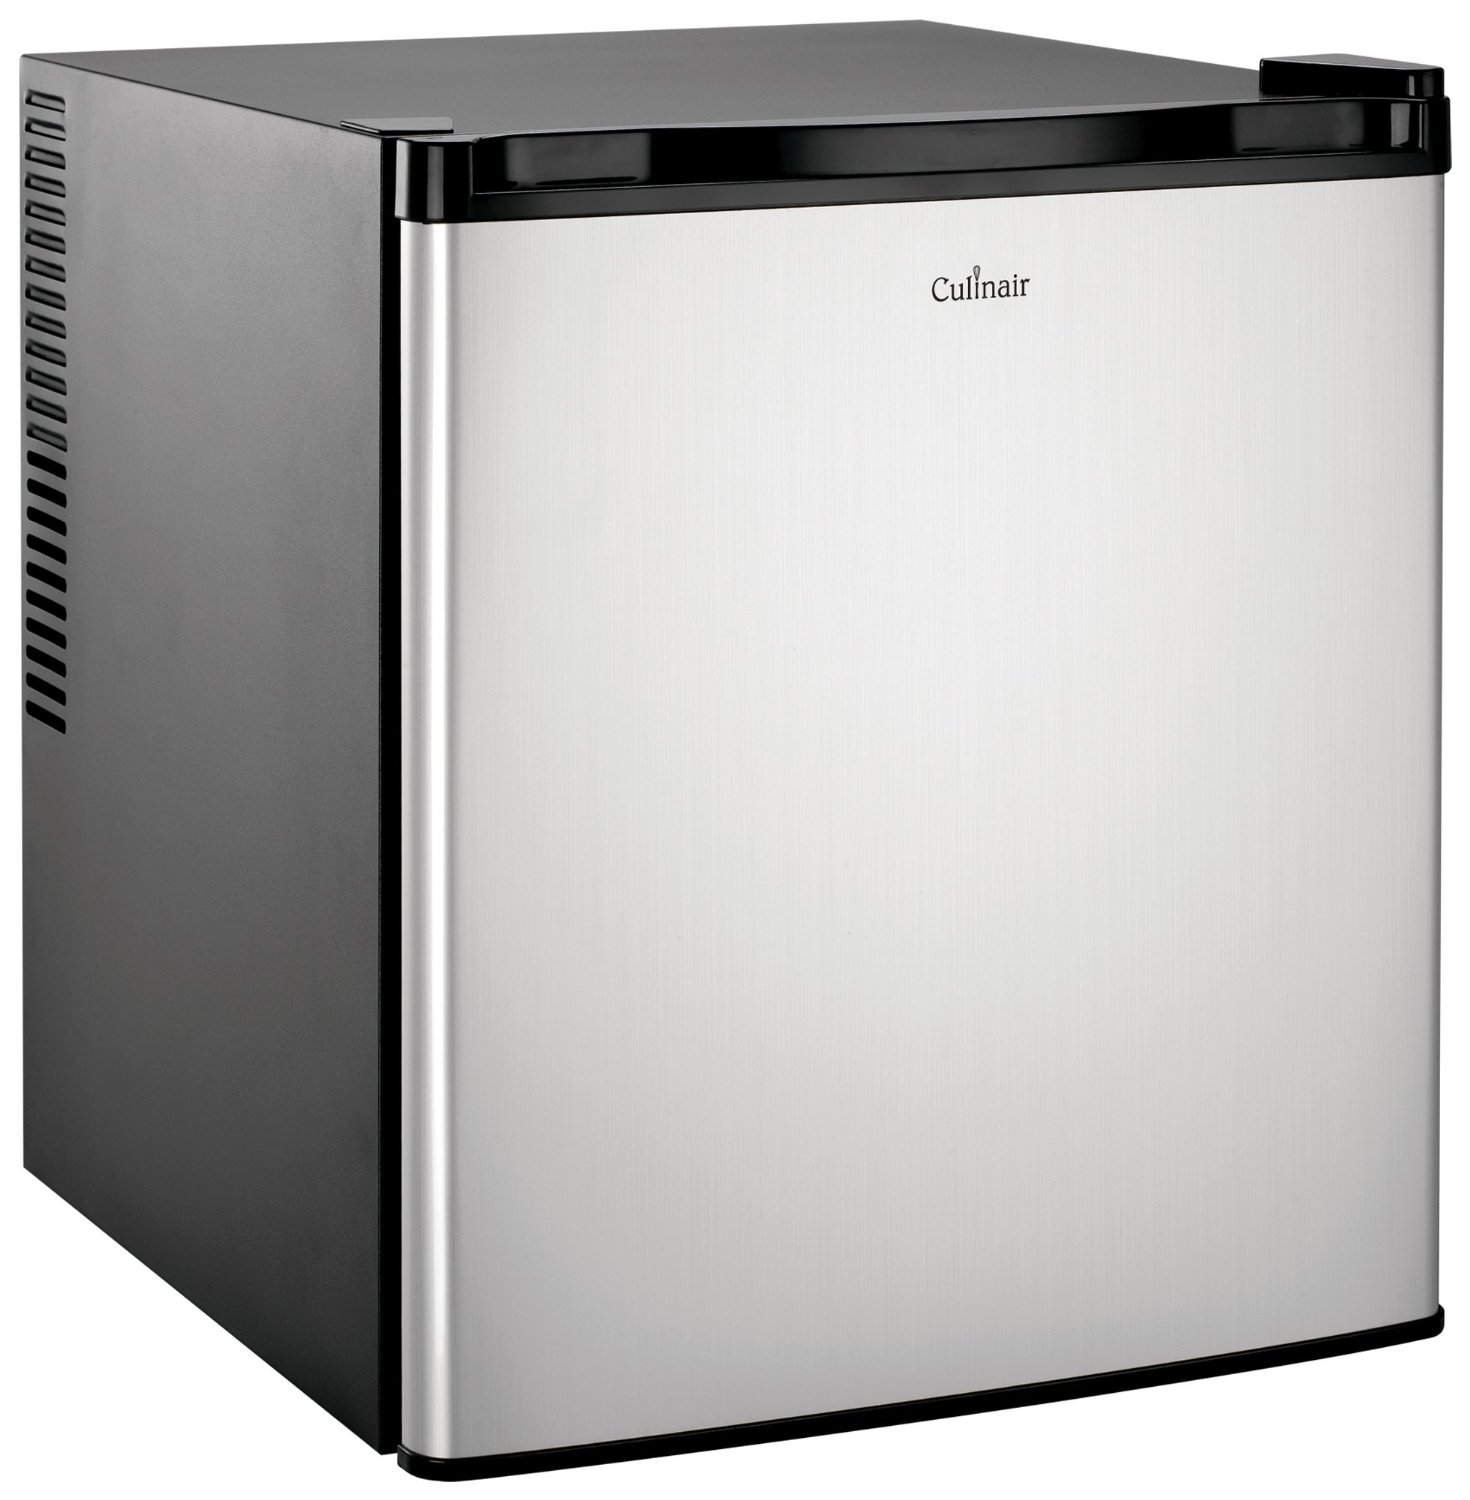 Culinair Af100s 1.7-Cubic Foot Compact Refrigerator, Silver and Black